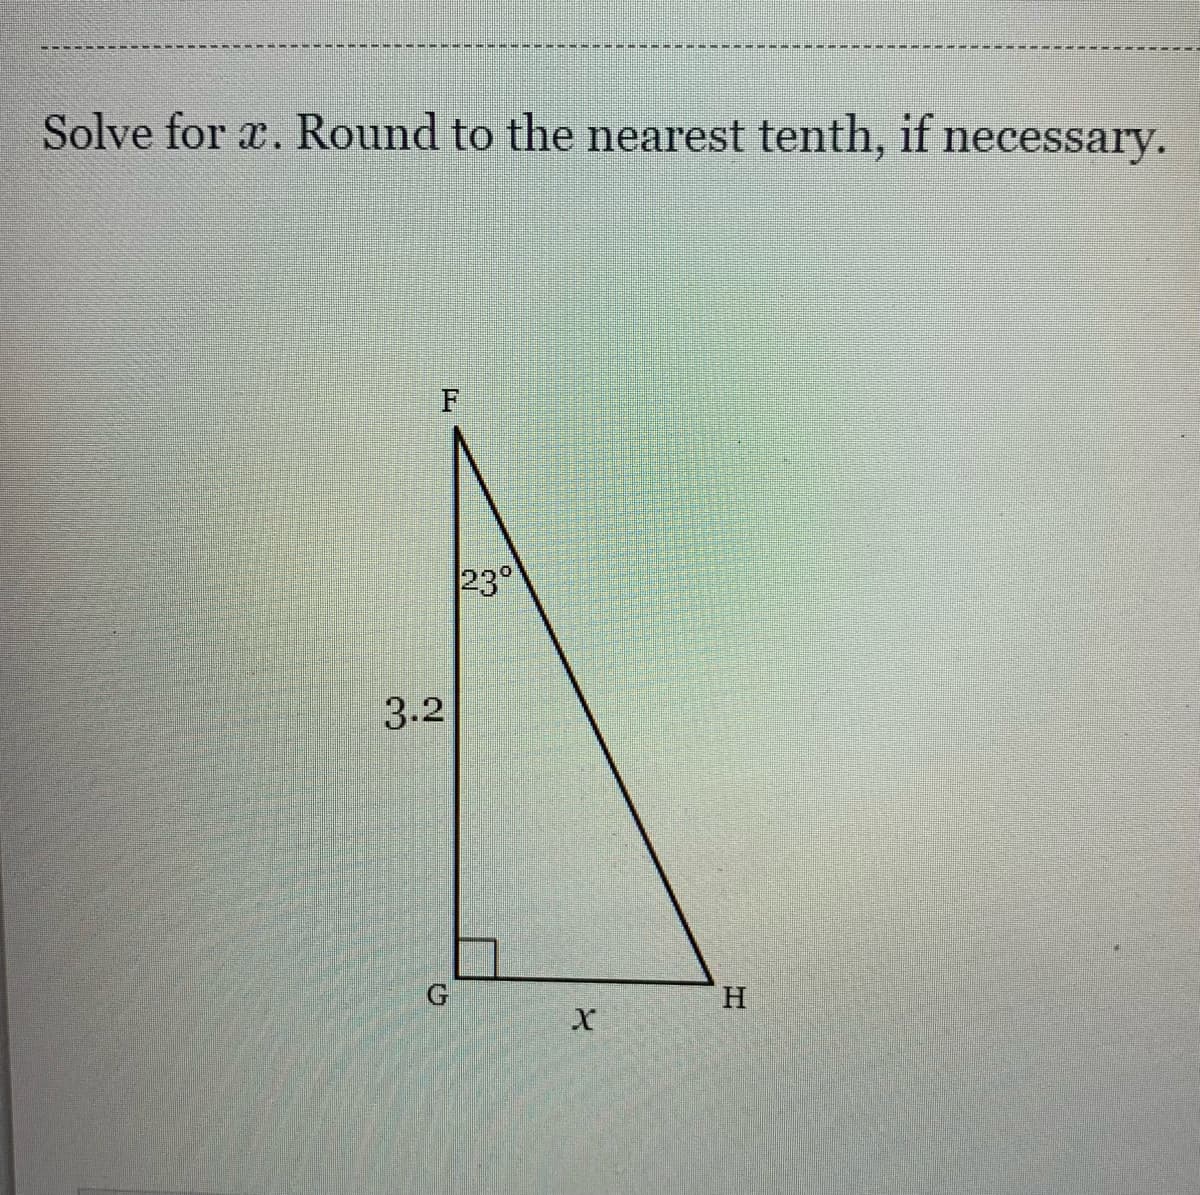 Solve for x. Round to the nearest tenth, if necessary.
23°
3.2
G
H.
